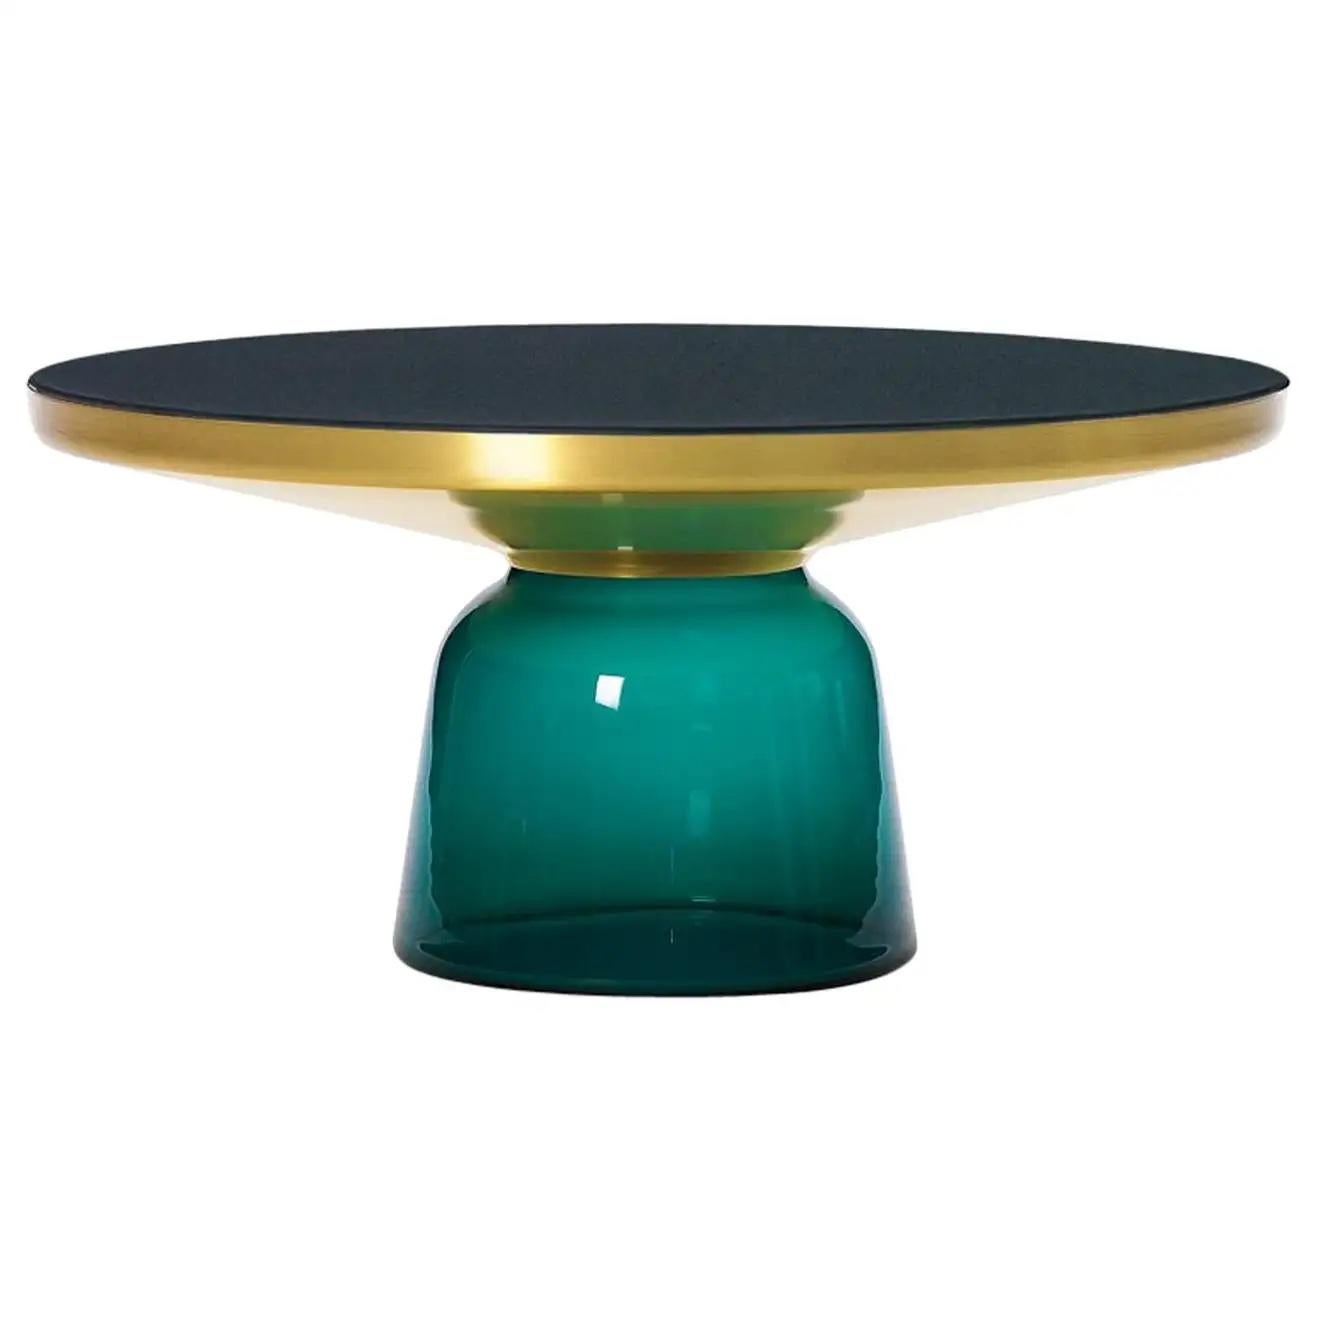 bell side table in quartz grey with brass and the coffee table in emerald with brass

Side Table Dimensions: Ø 50 cm, H 53 cm.

Coffee Table Dimensions
Height: 14.18 in. (36 cm)
Diameter: 29.53 in. (75 cm)